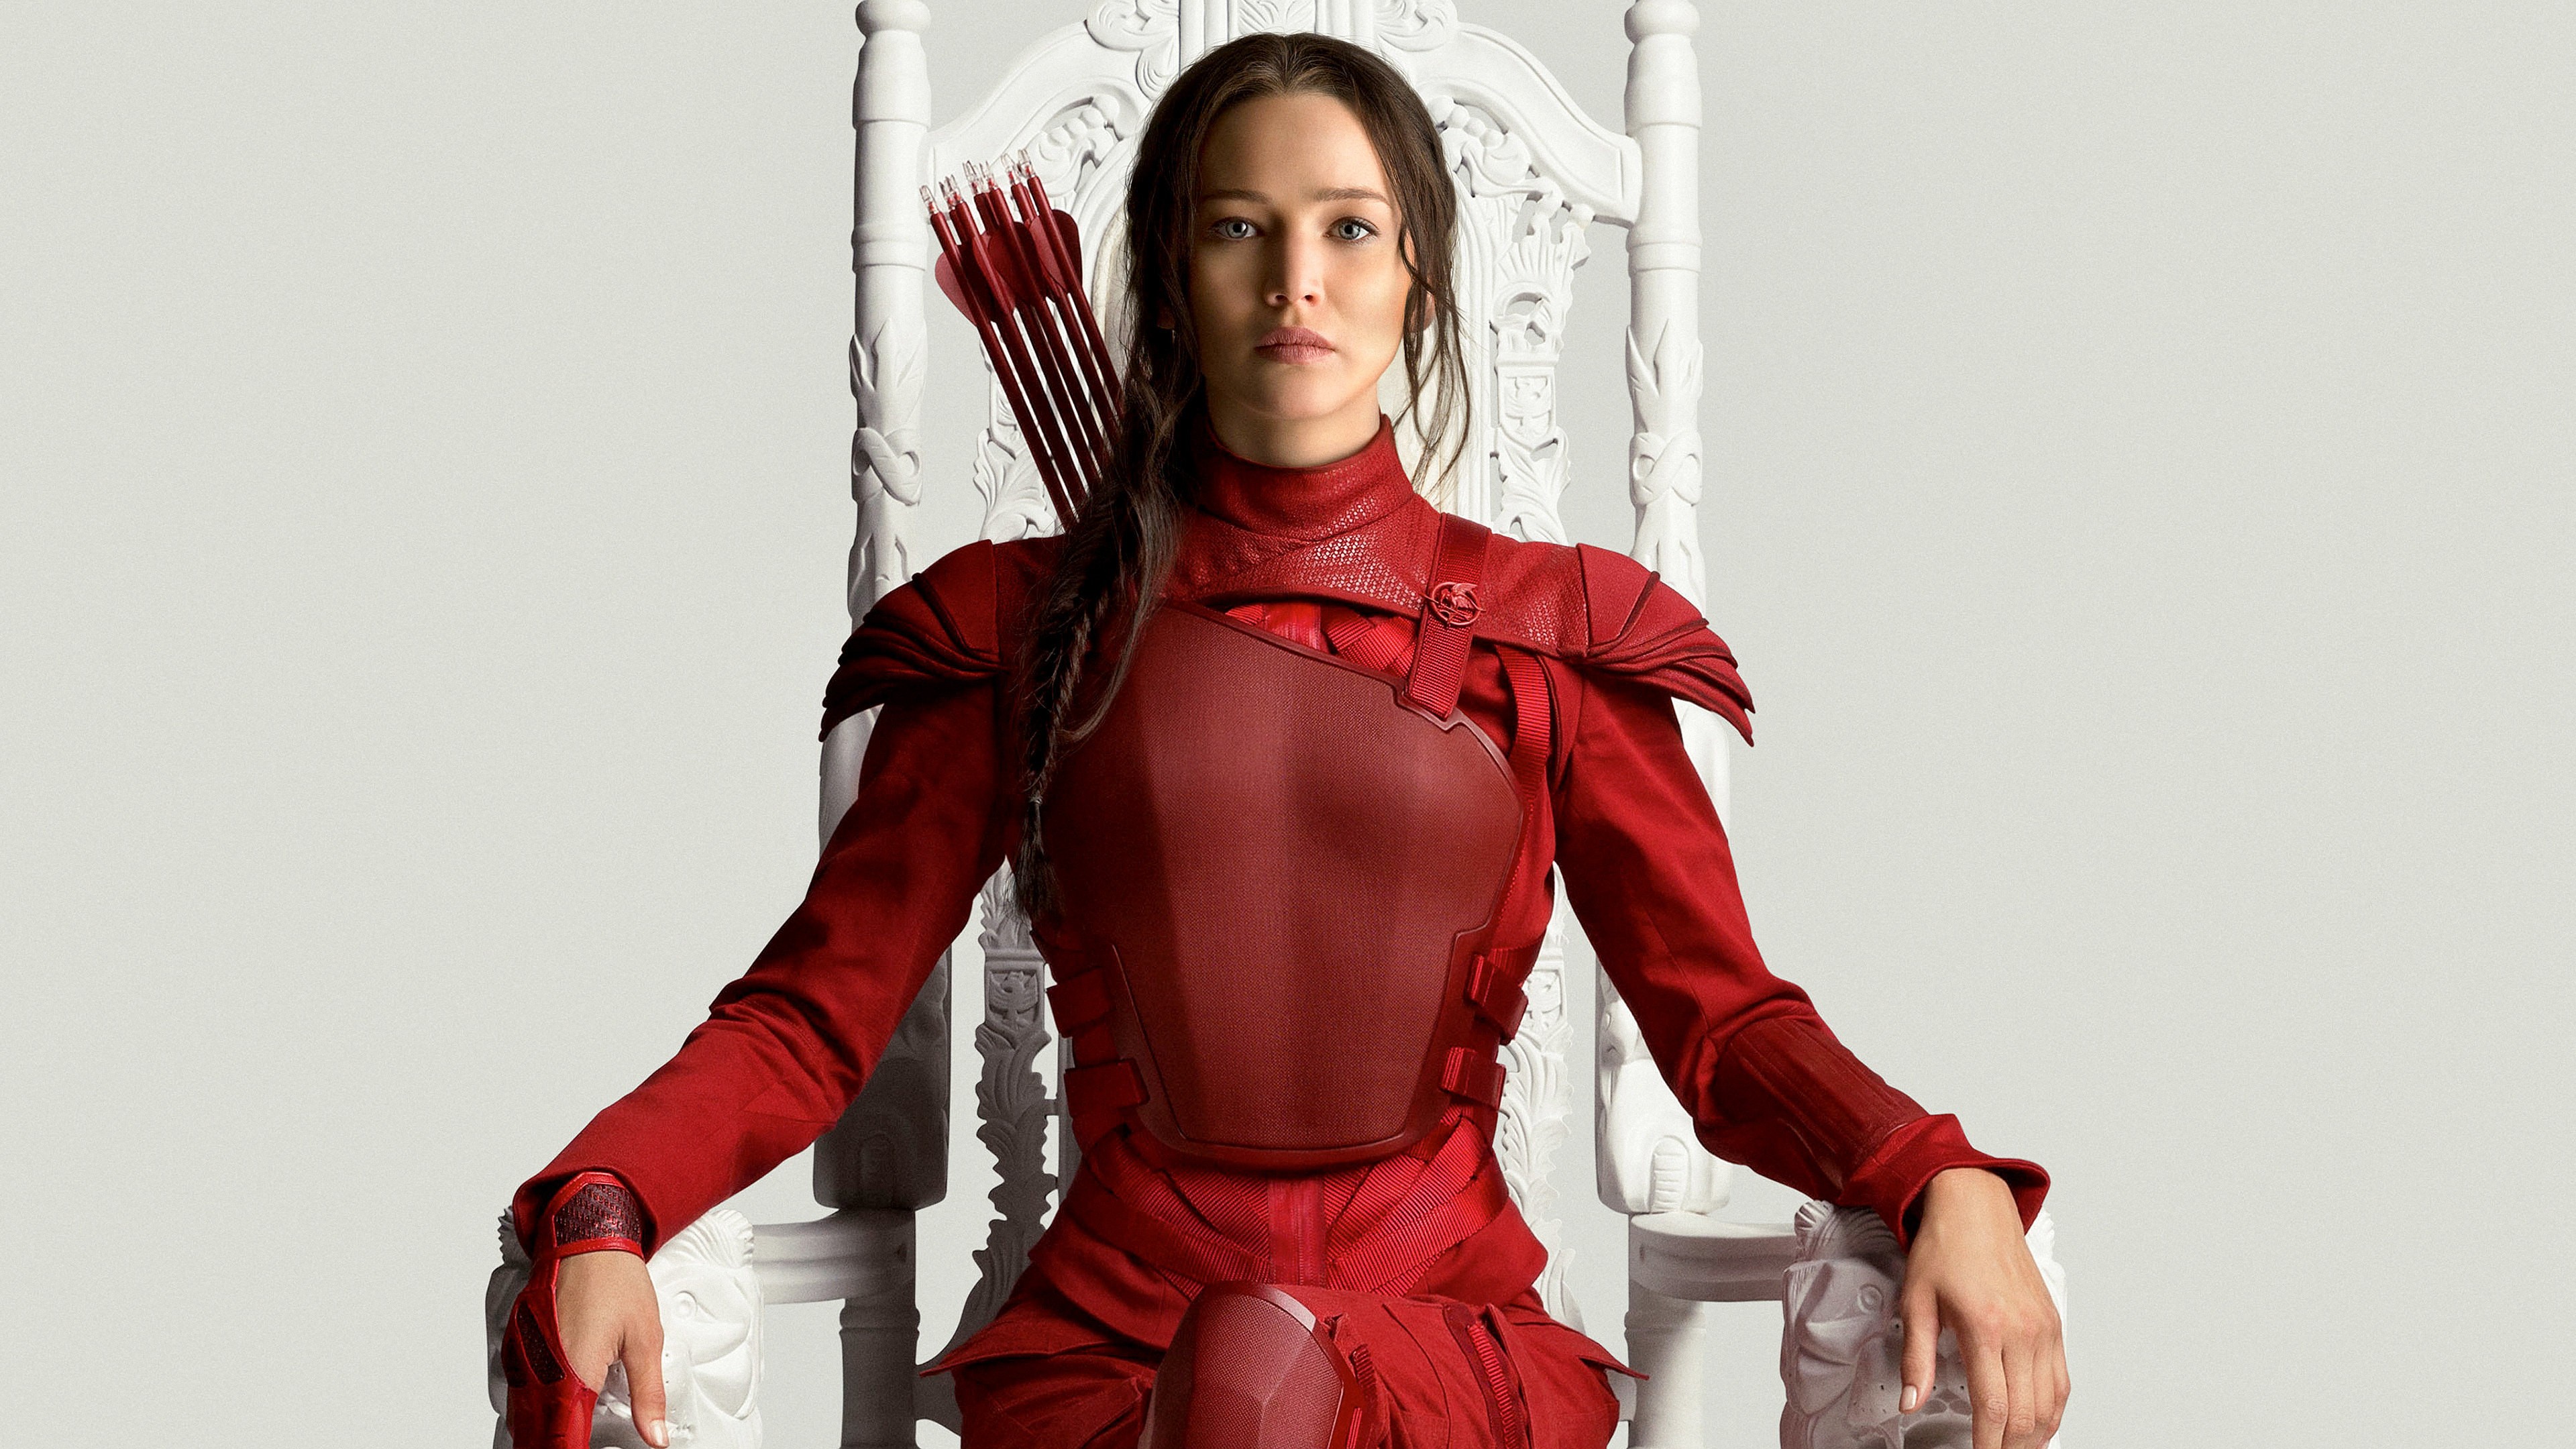 People 3840x2160 movies The Hunger Games: Mockingjay - Part 2 celebrity Jennifer Lawrence photoshopped American women Katniss Everdeen women actress throne sitting arrows red clothing looking at viewer The Hunger Games